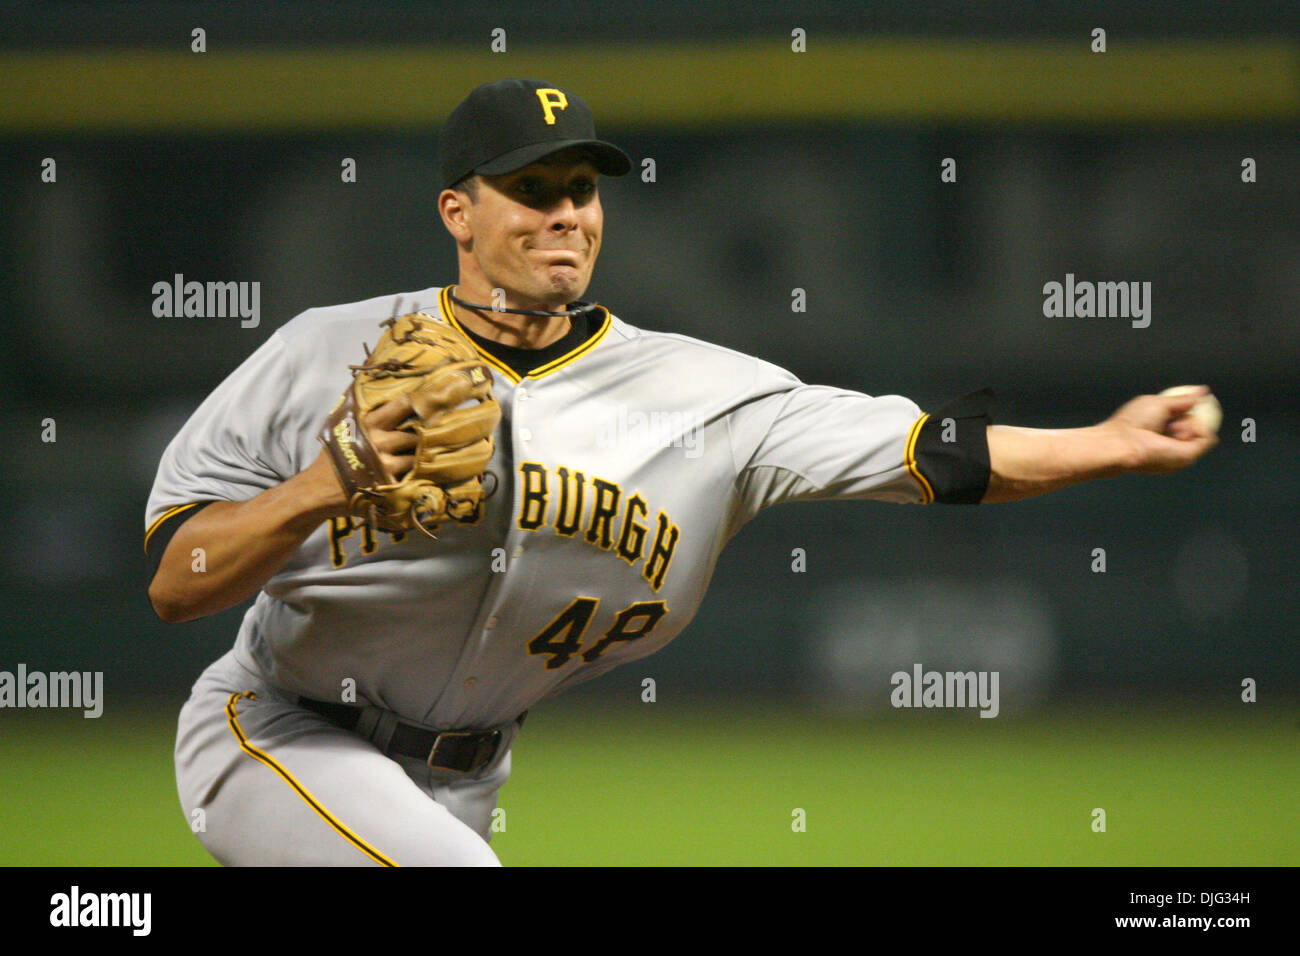 Pittsburgh Pirates relief pitcher Javier Lopez (48) shows his side arm delivery. The Houston Astros defeated the Pittsburgh Pirates 6 - 2 at Minute Maid Park, Houston, Texas. (Credit Image: © Luis Leyva/Southcreek Global/ZUMApress.com) Stock Photo